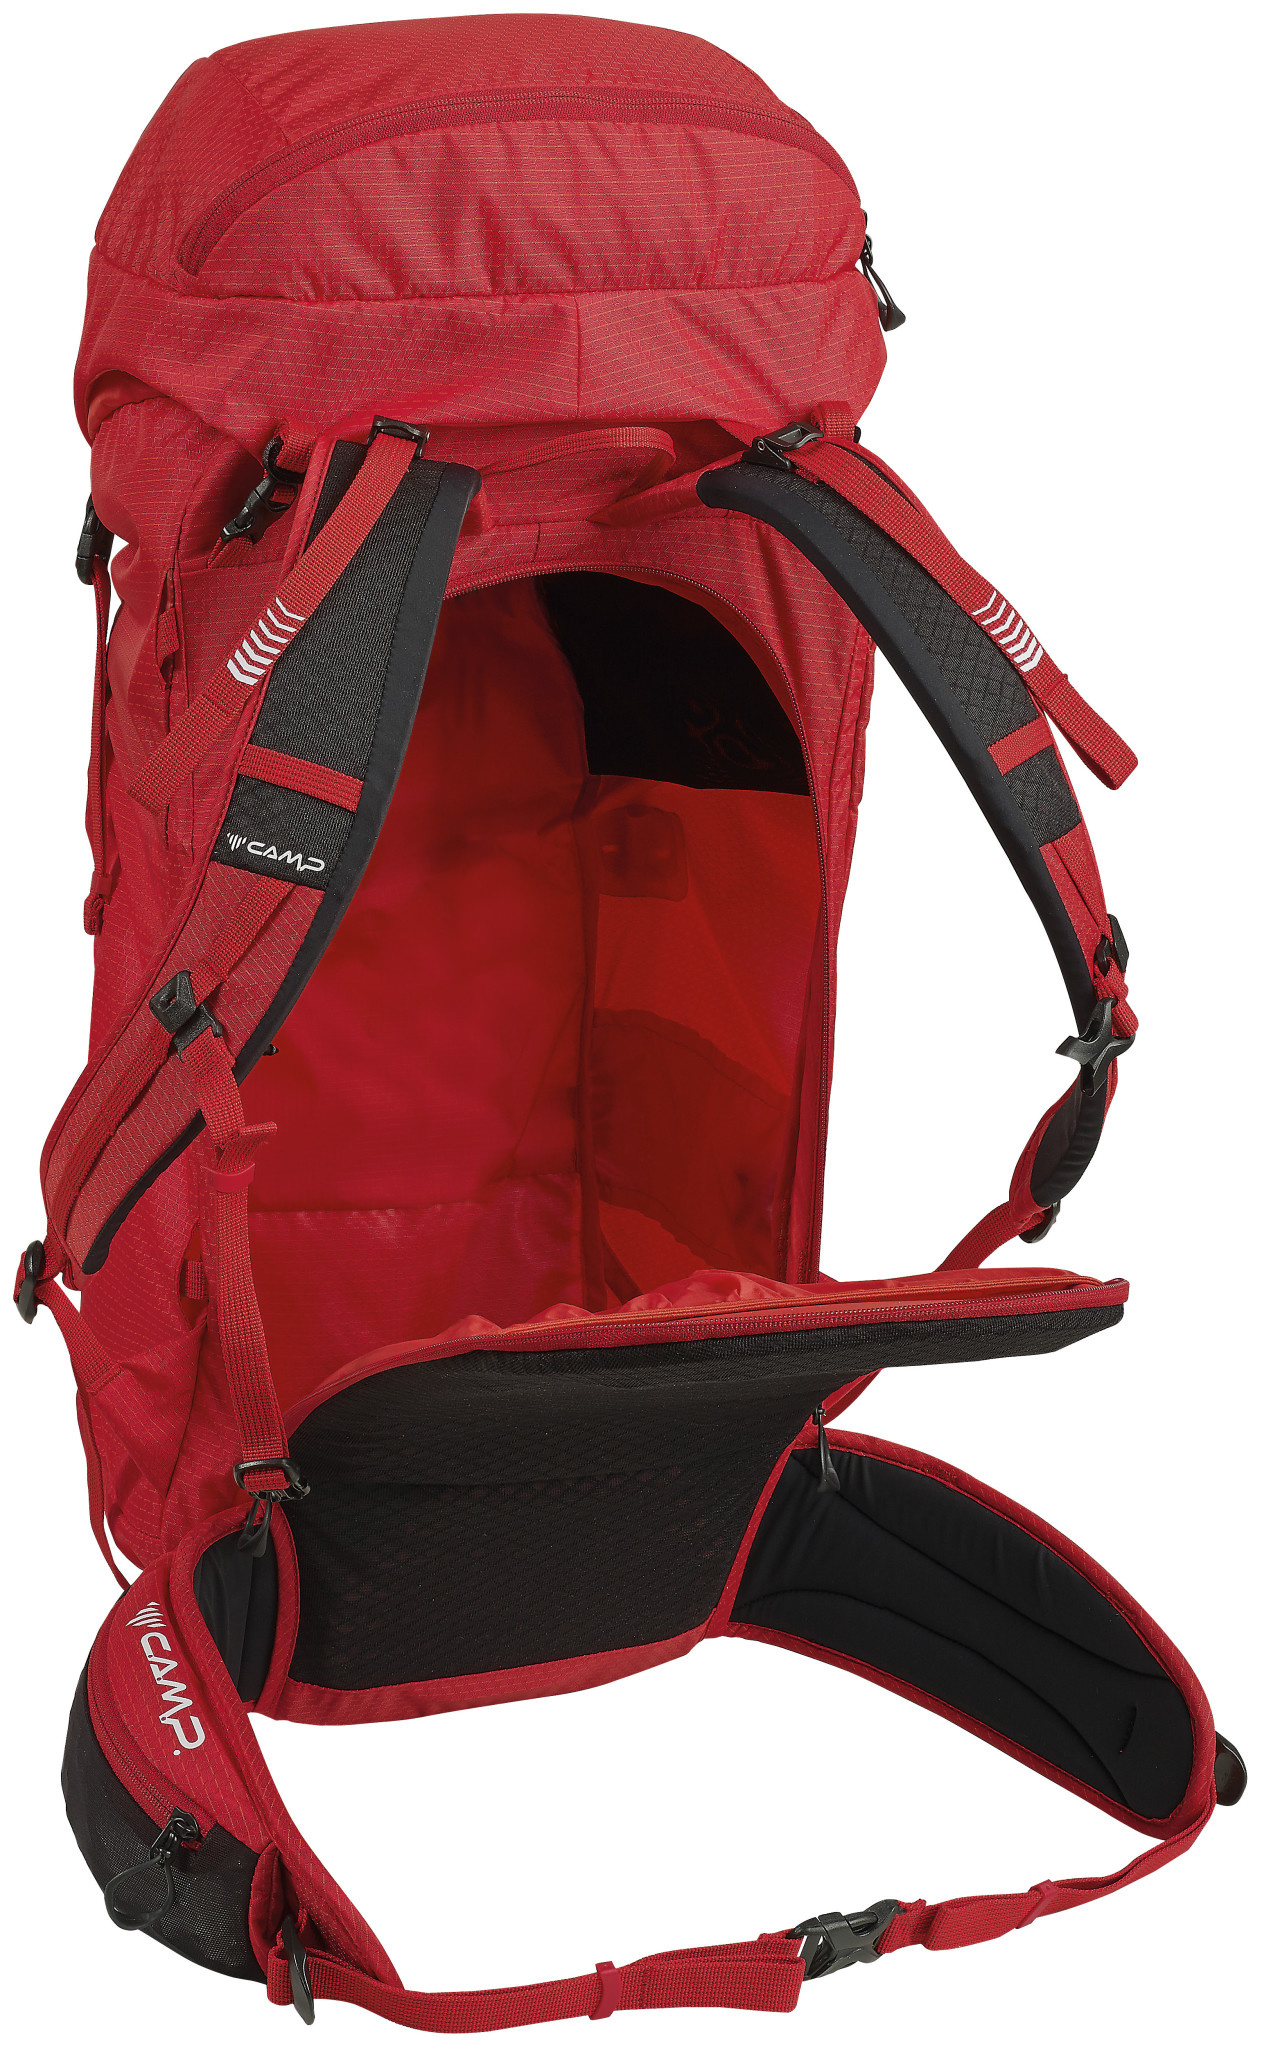 Camp USA M45 Backpack  The BackCountry in Truckee, CA - The BackCountry